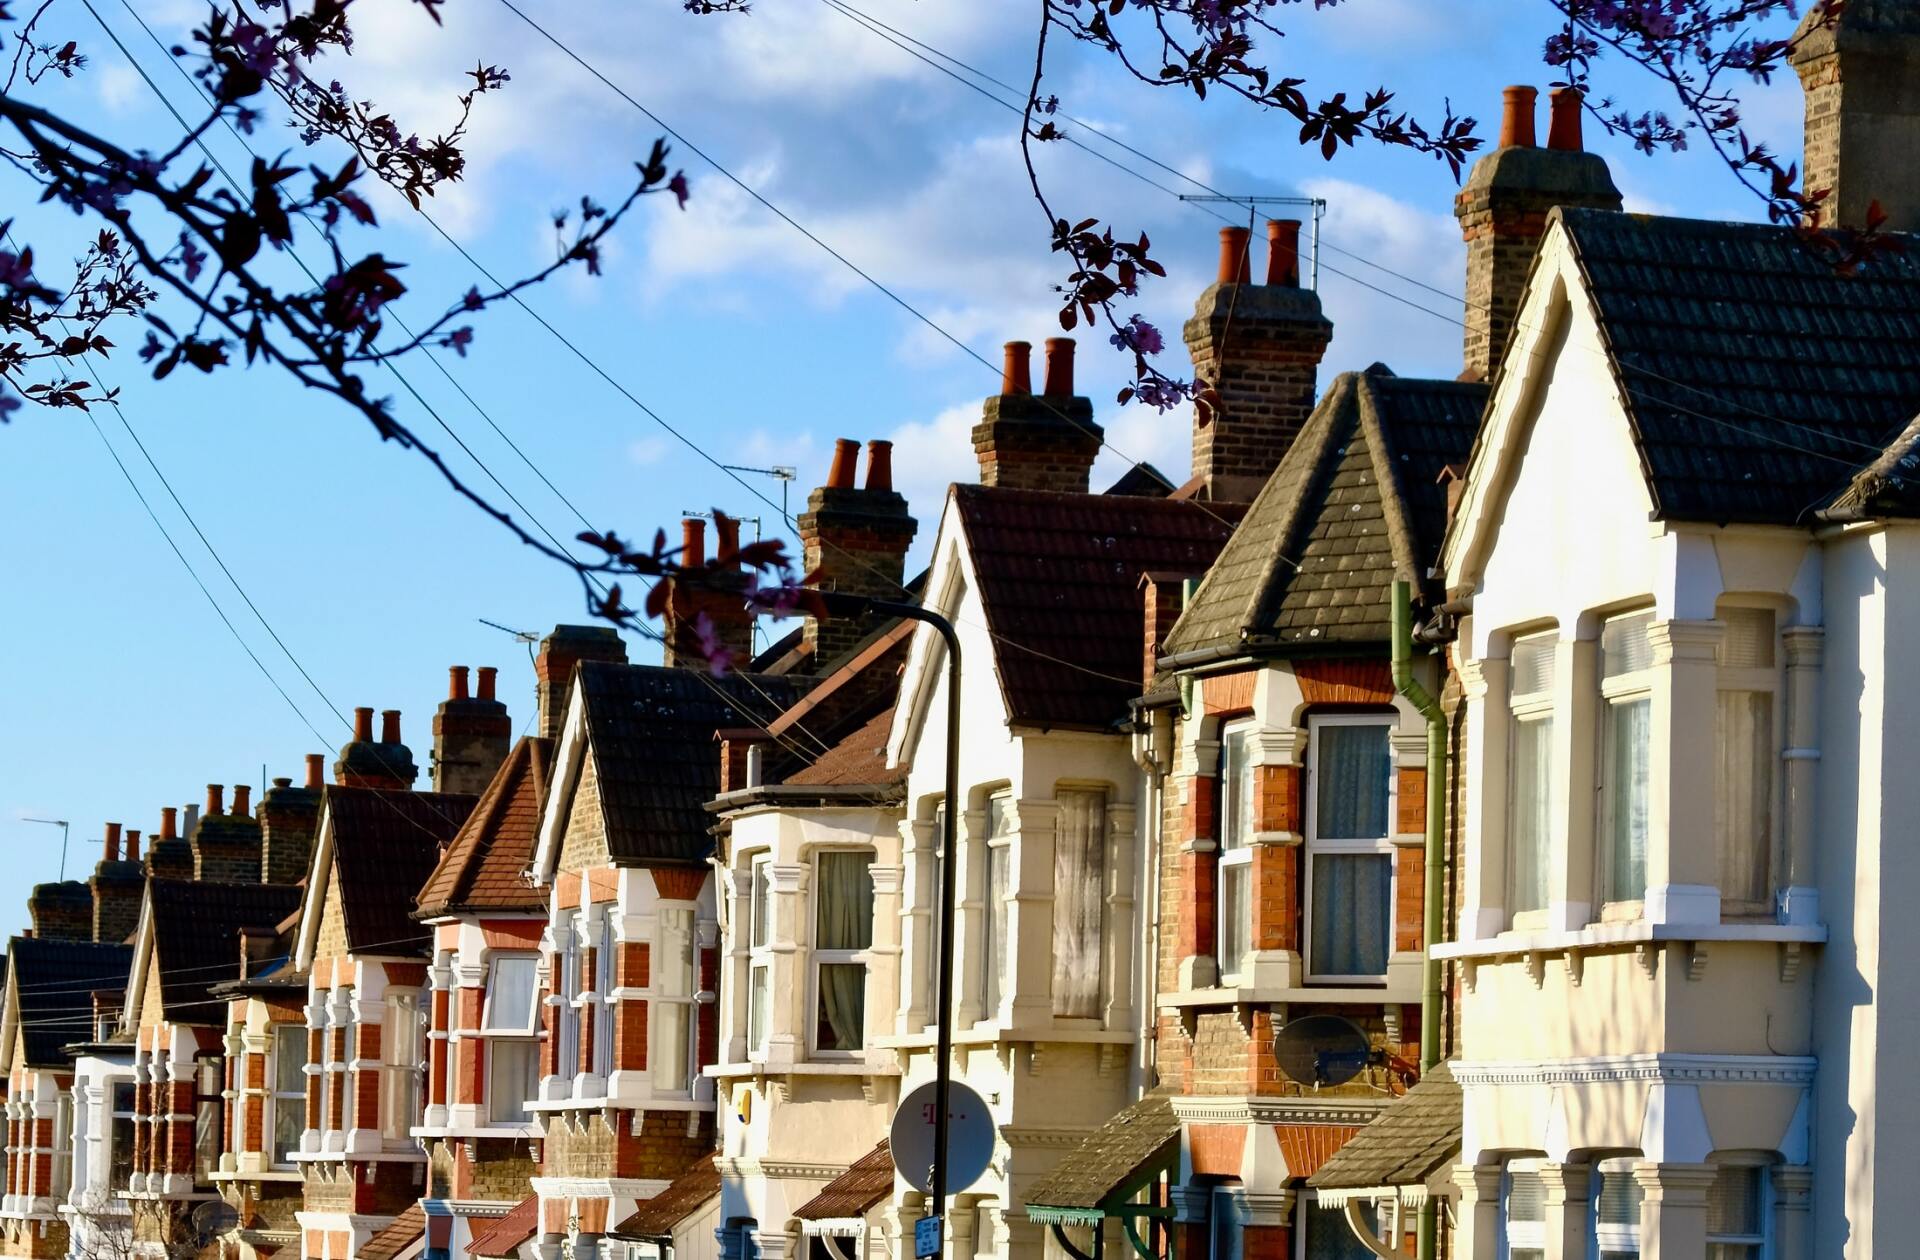 A picture of a row of terraced houses in London with pitched roofs